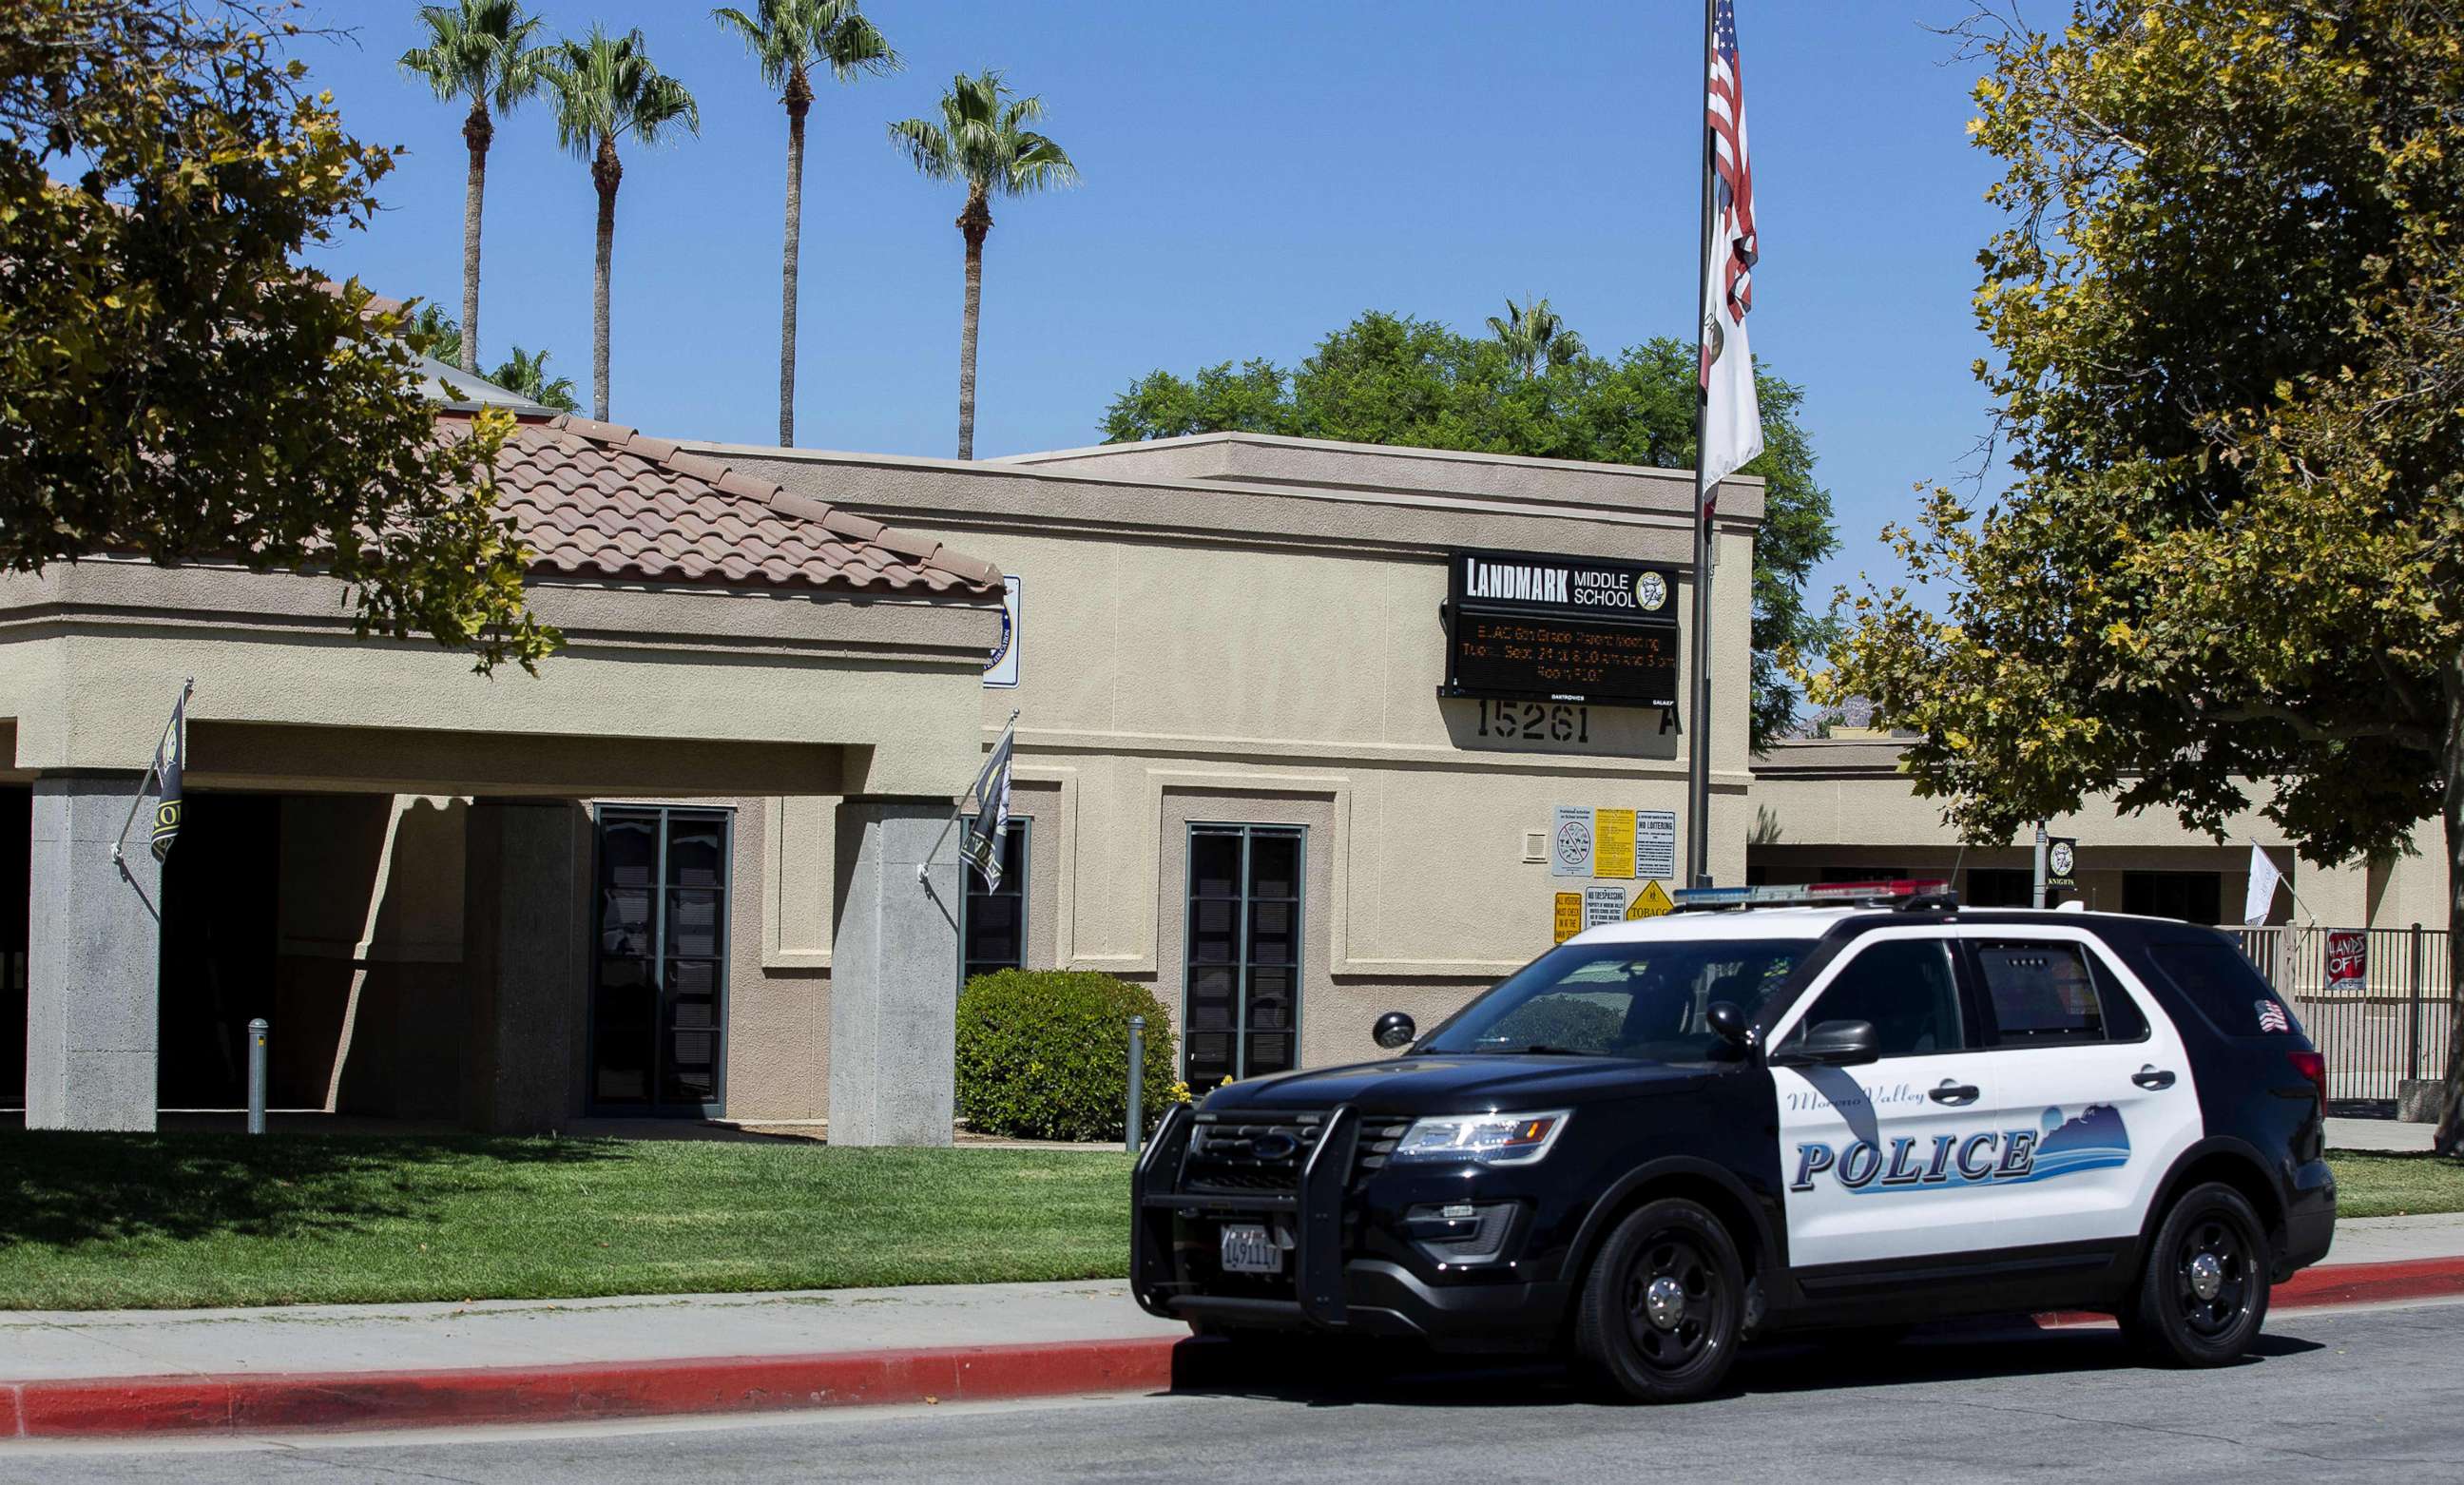 PHOTO: A police car sits in front of the Landmark Middle School in Moreno Valley, Calif., Sept. 18, 2019.